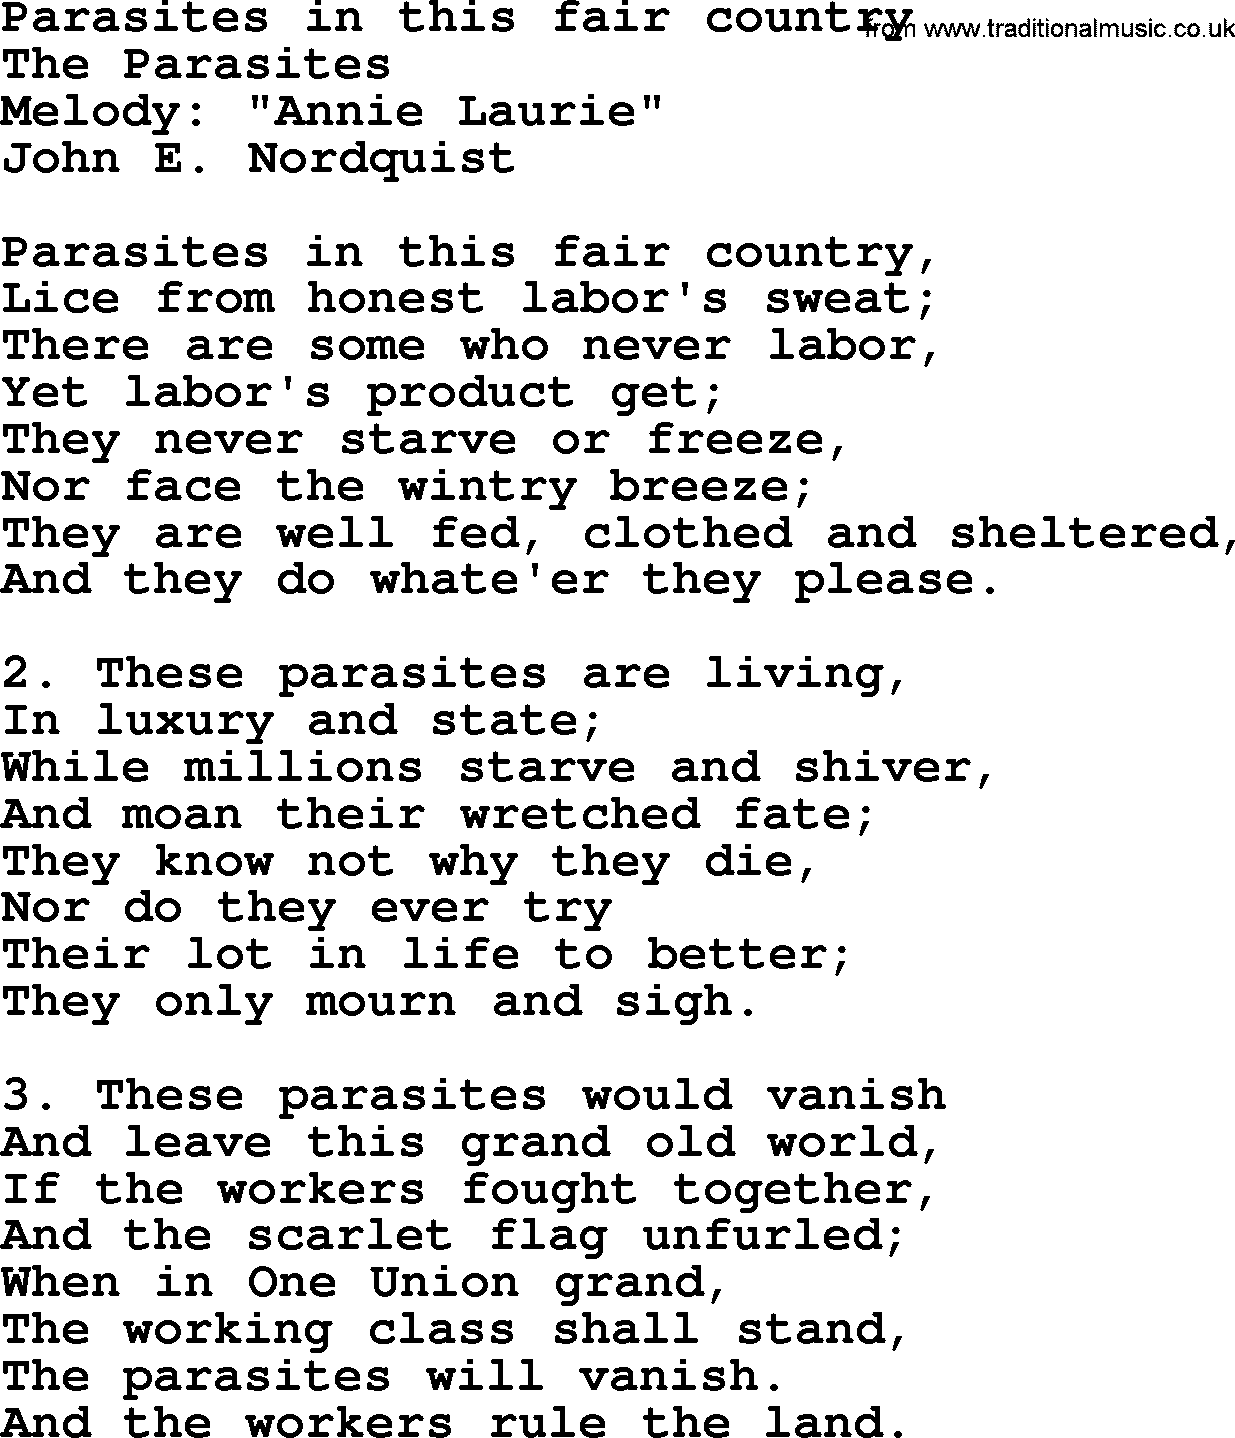 Political, Solidarity, Workers or Union song: Parasites In This Fair Country, lyrics